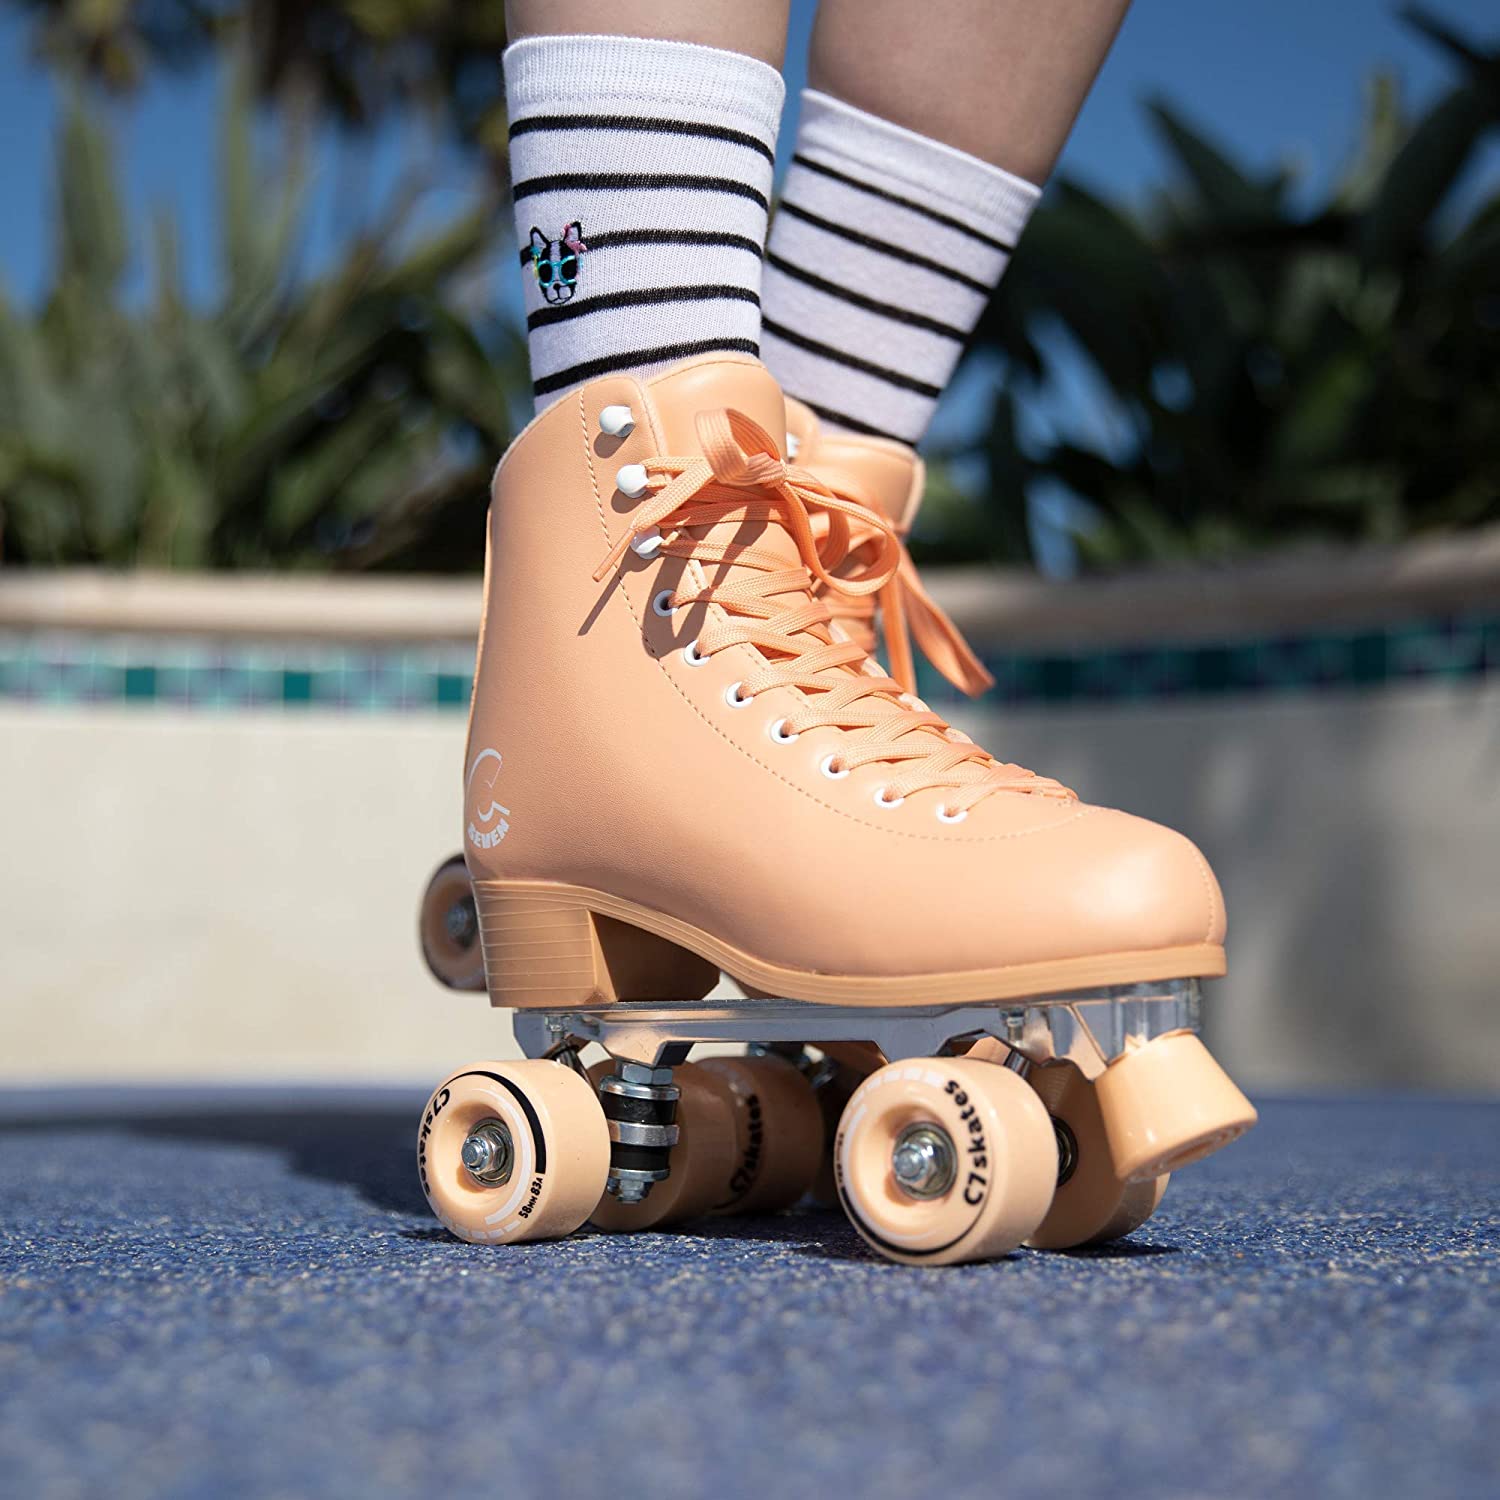 C7skates Roller Skates for Girls and Adults (Peachy Keen, Women's 8 ...